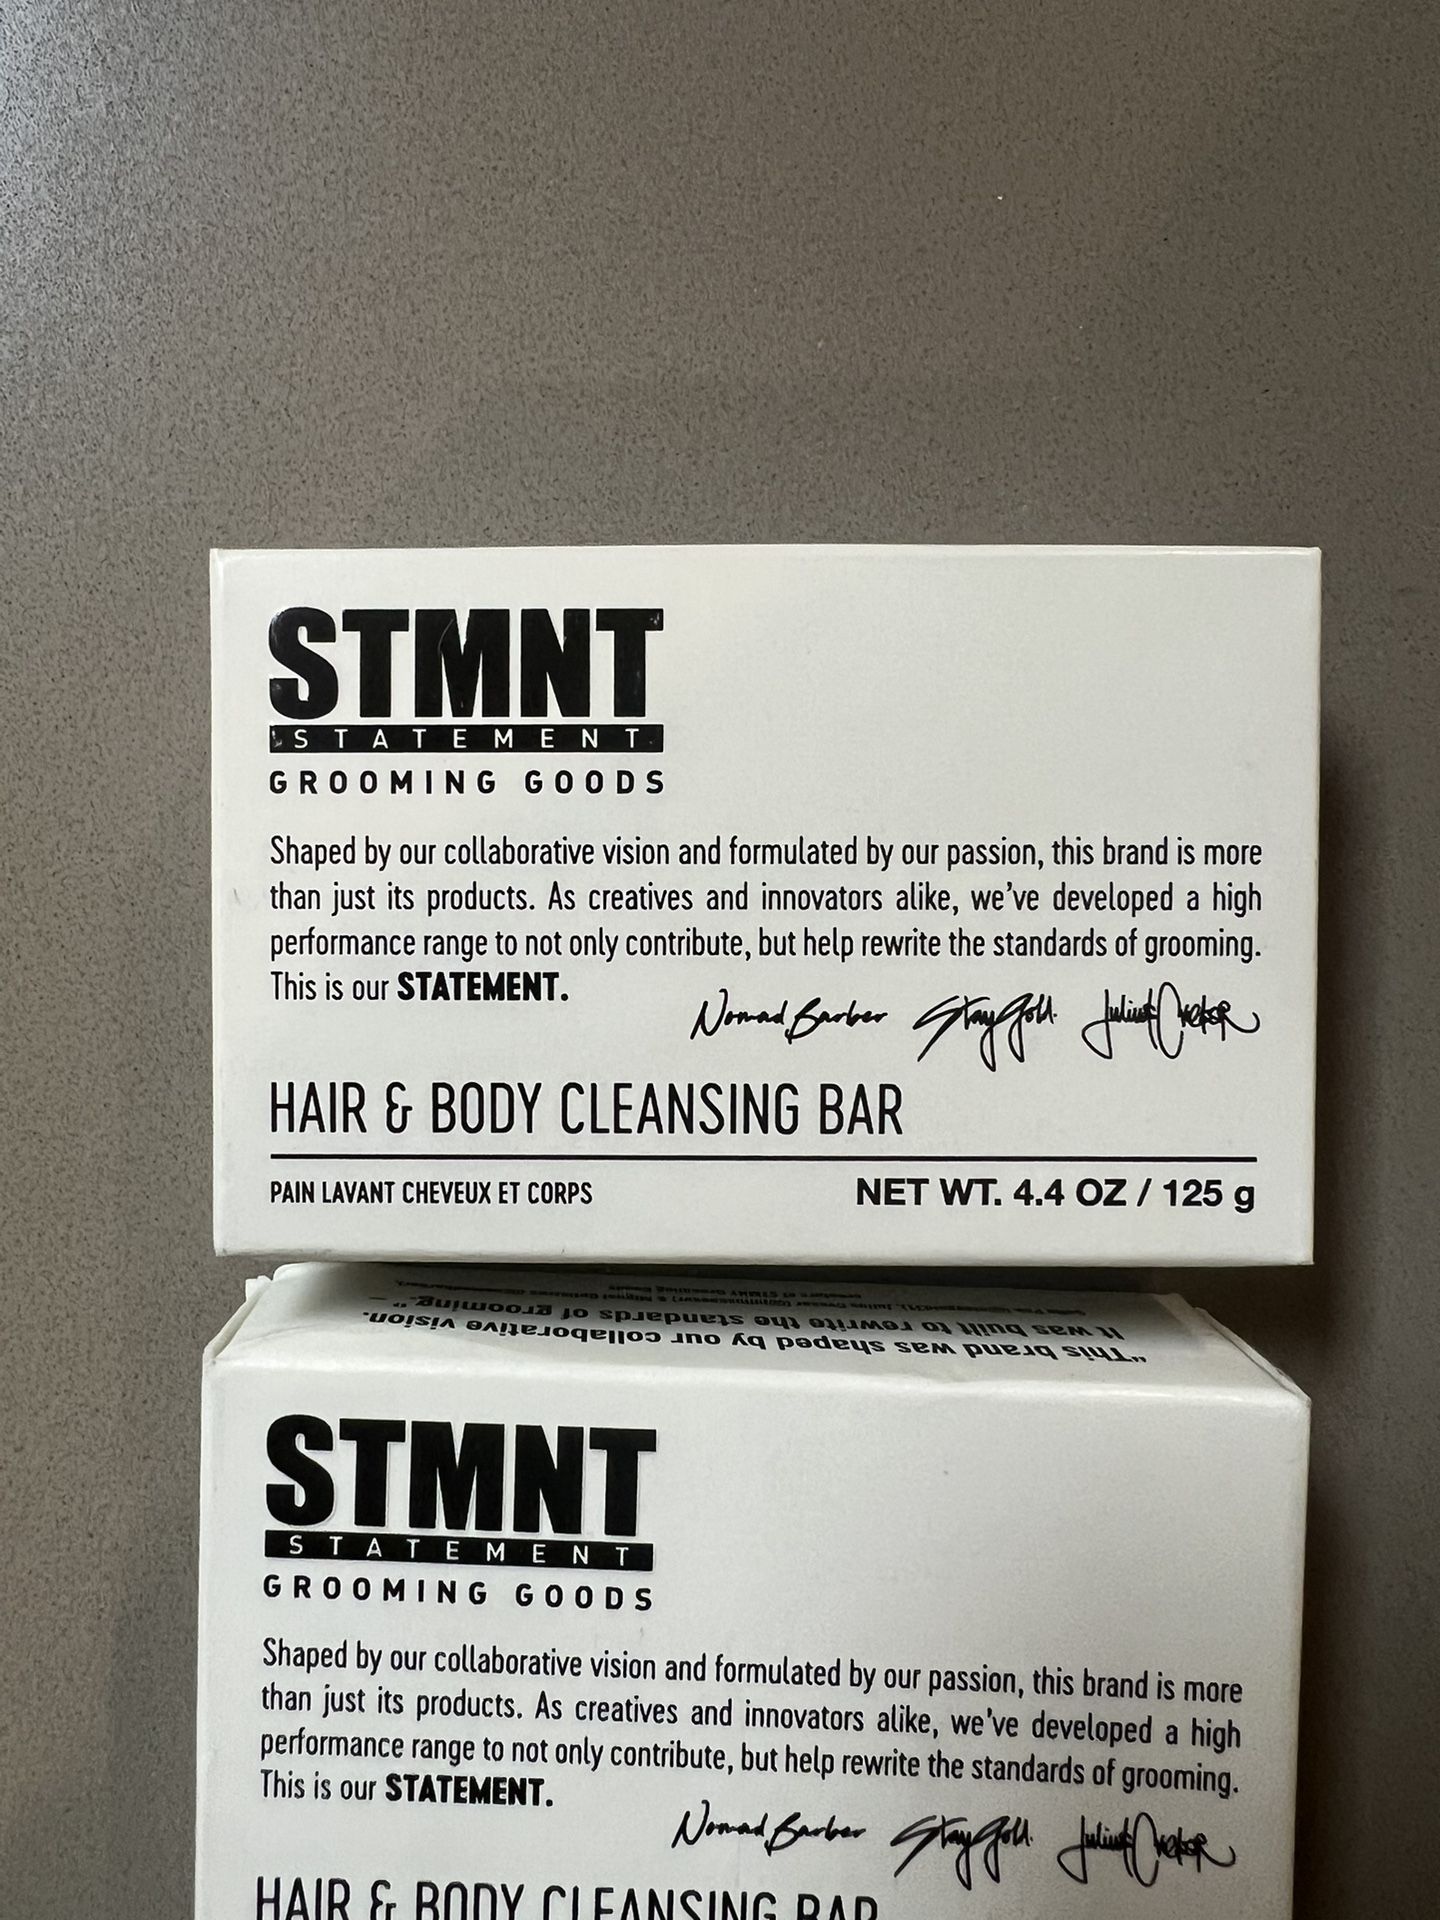 STMNT Statement Grooming Goods Hair And Body Cleansing Bars 4.4 oz $5 Each